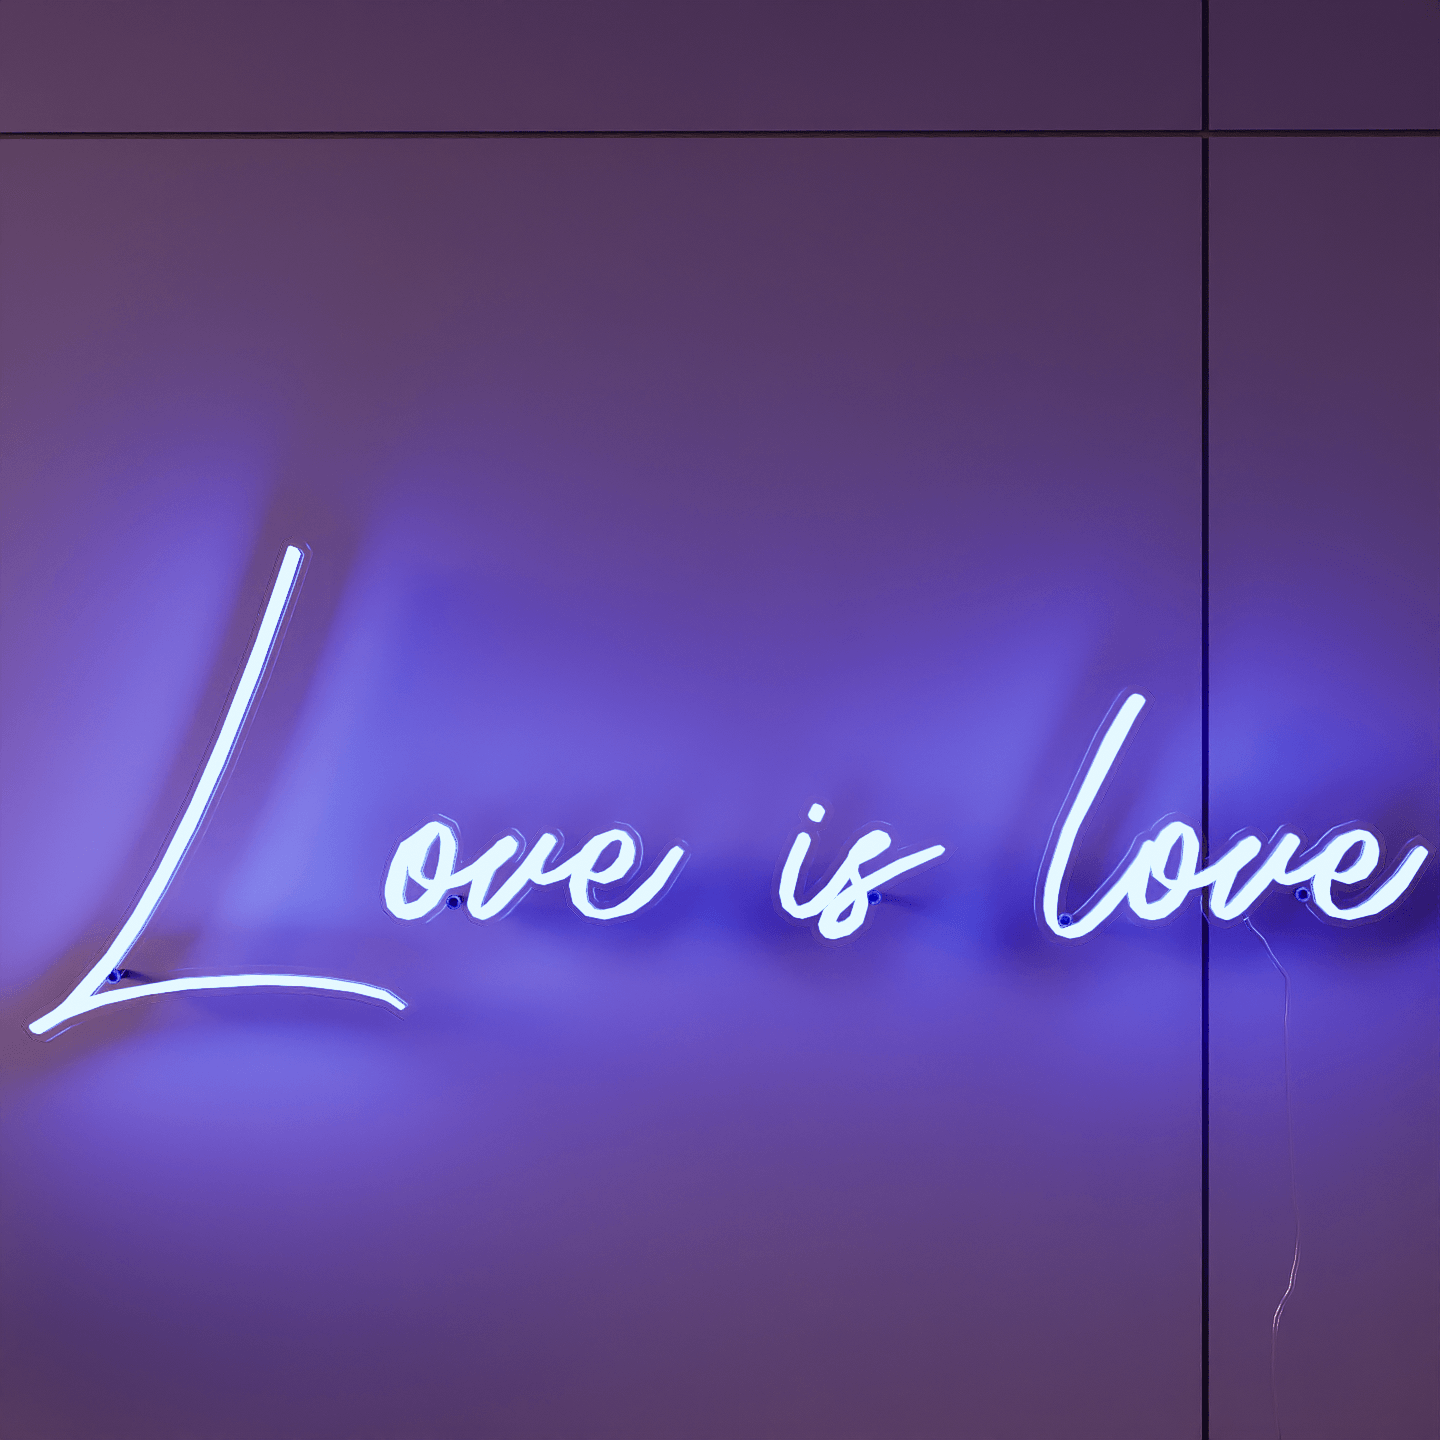 frontal-shot-of-lit-blue-neon-lights-hanging-on-wall-for-display-love-is-love